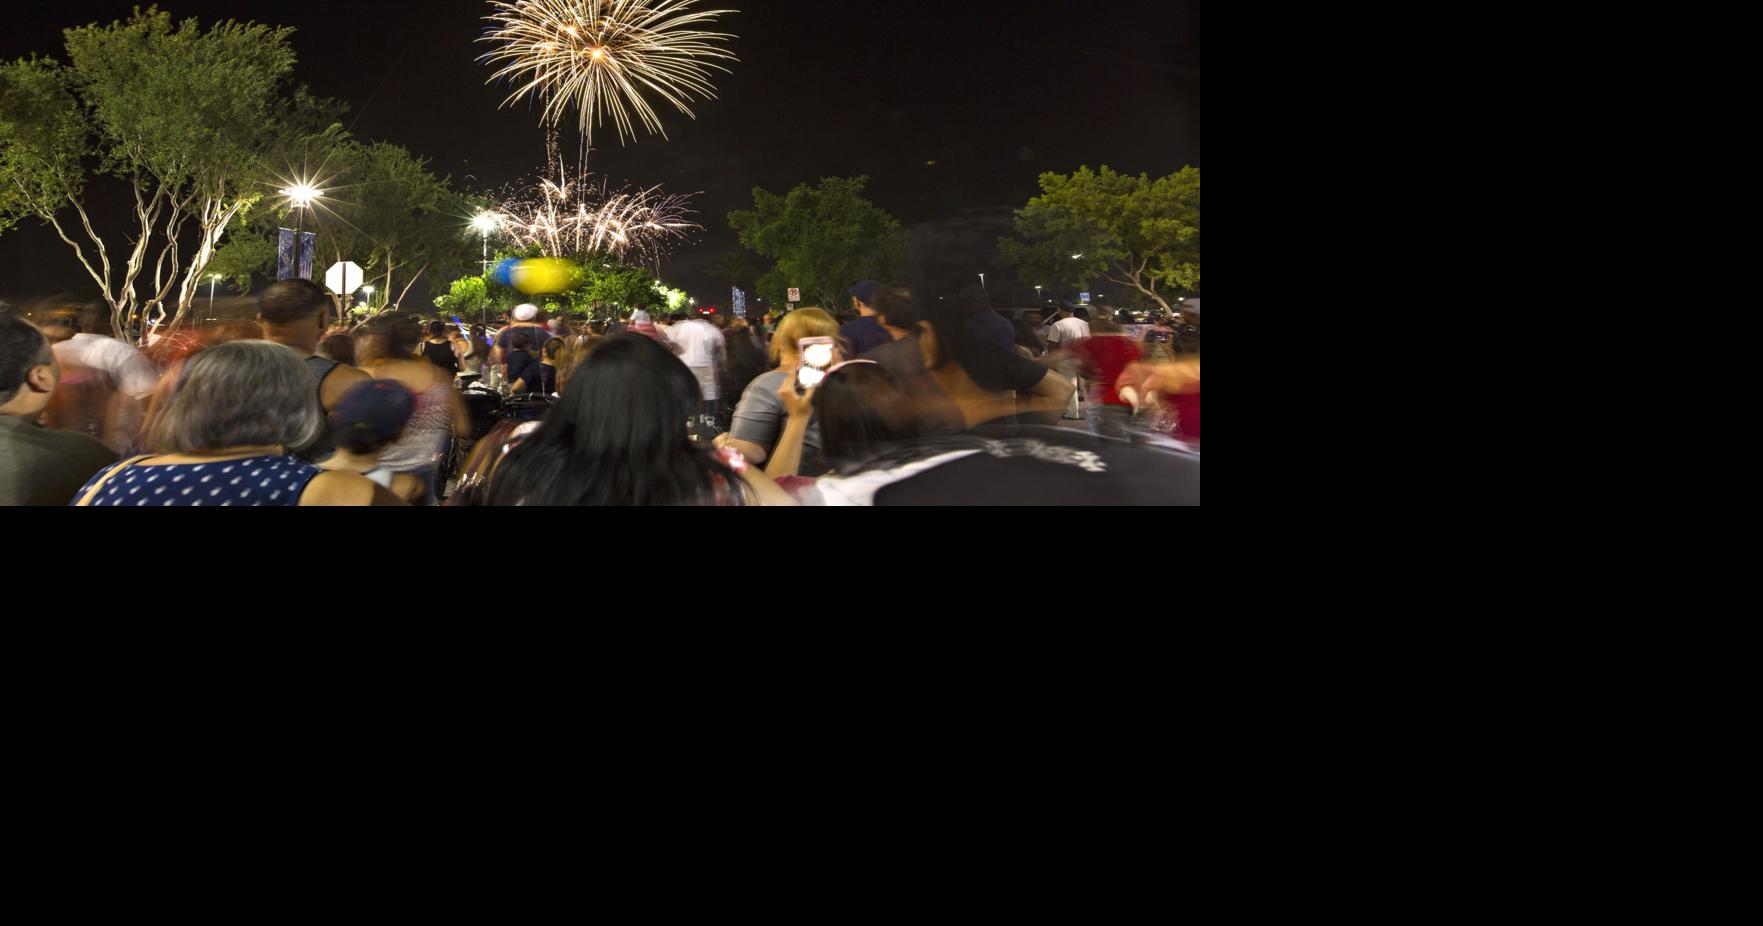 Westgate’s 6th annual Fireworks Fest features Glendale’s largest